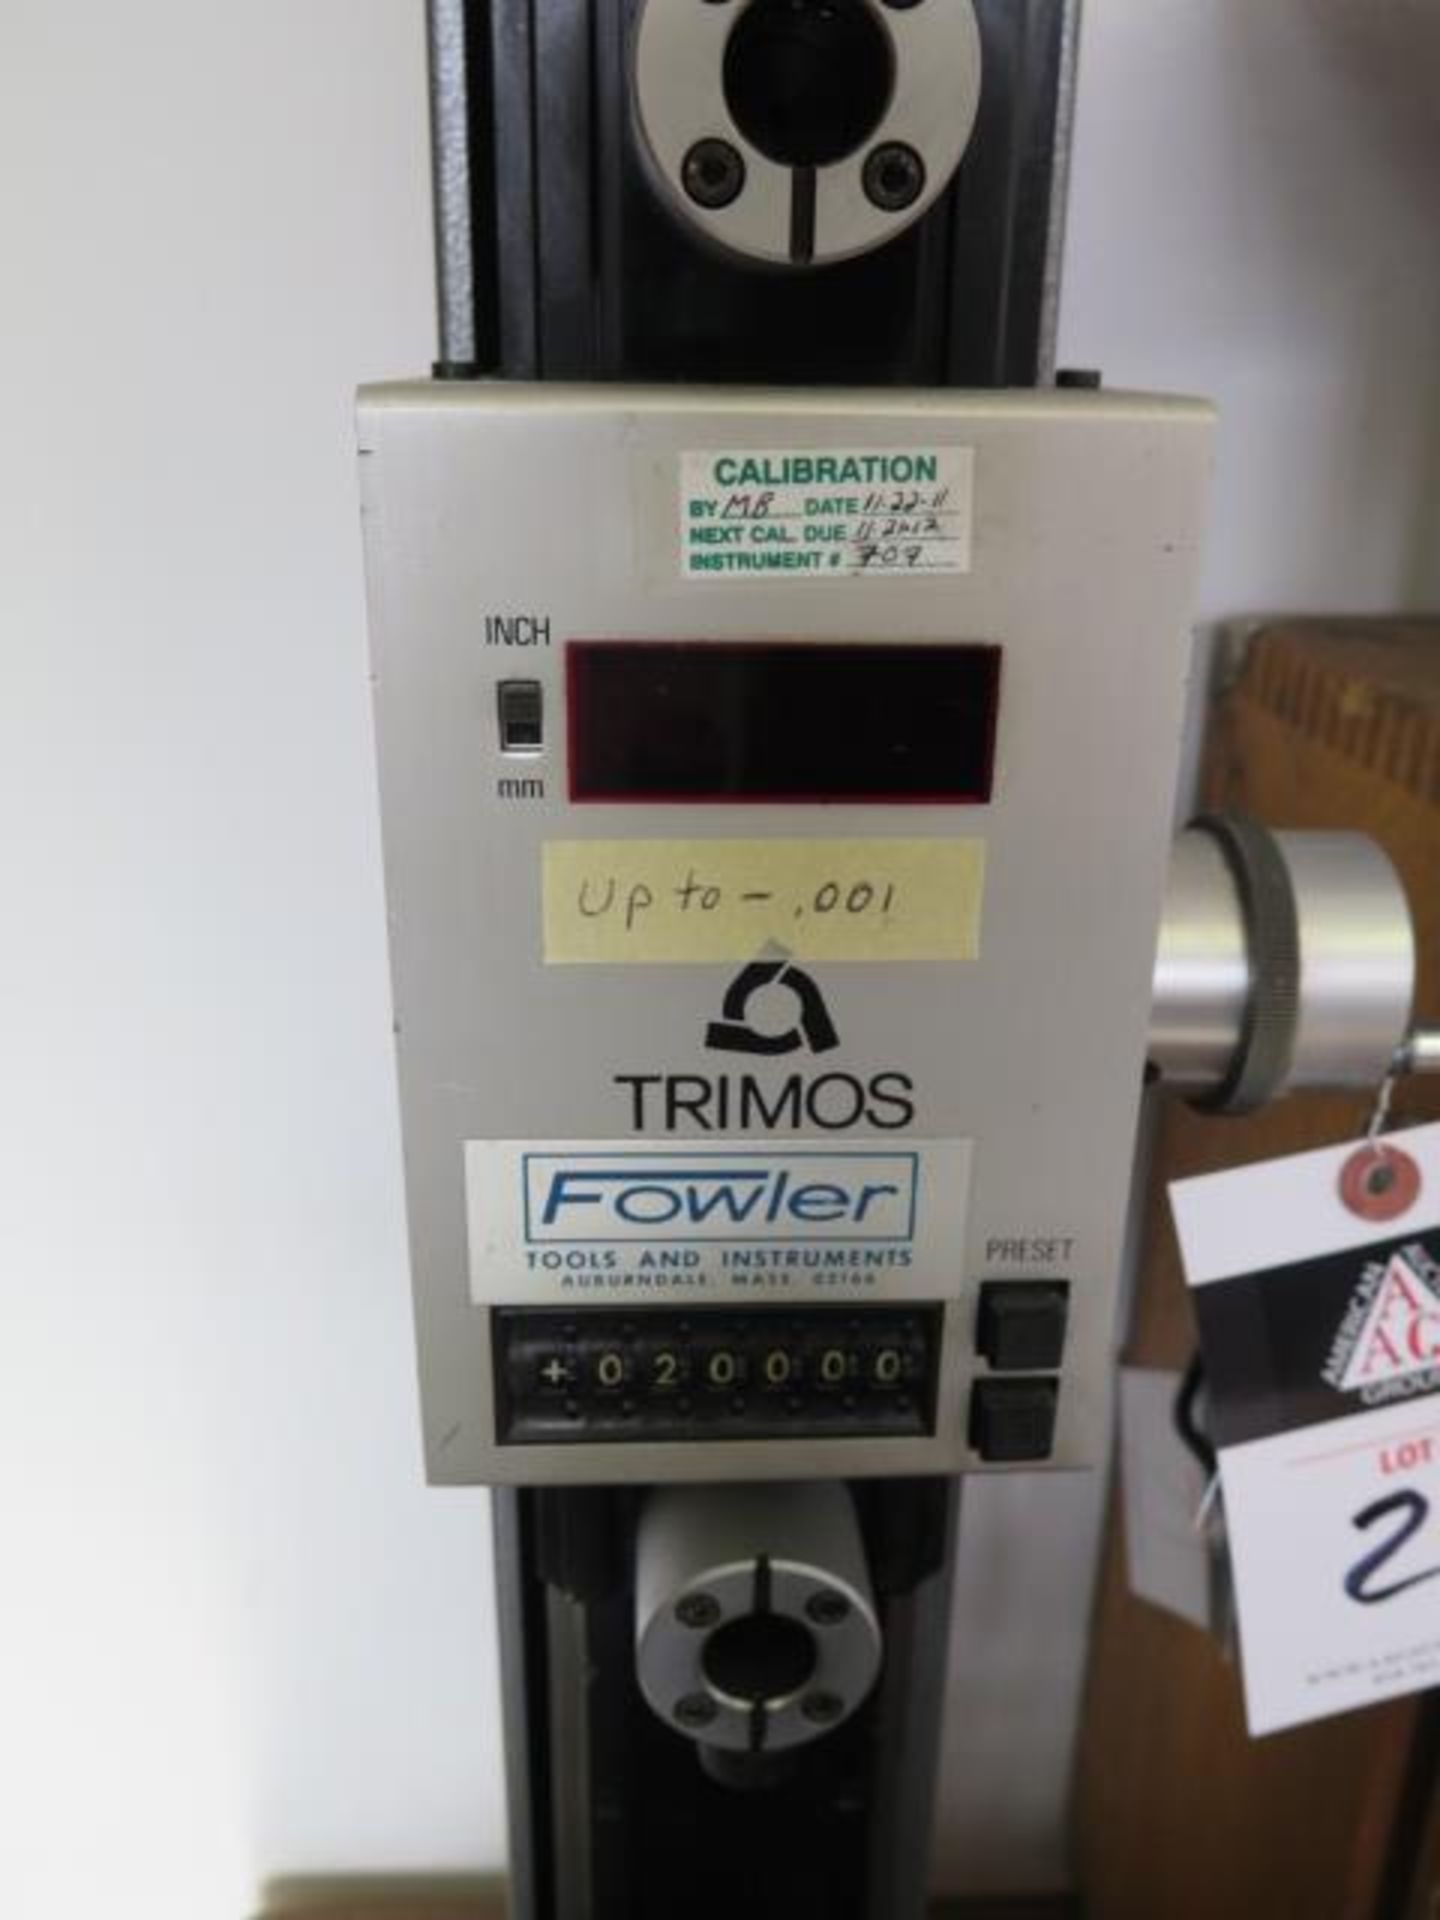 Fowler Trimos "Vertical 500" 19" Digital Height Gage (SOLD AS-IS - NO WARRANTY) - Image 3 of 8